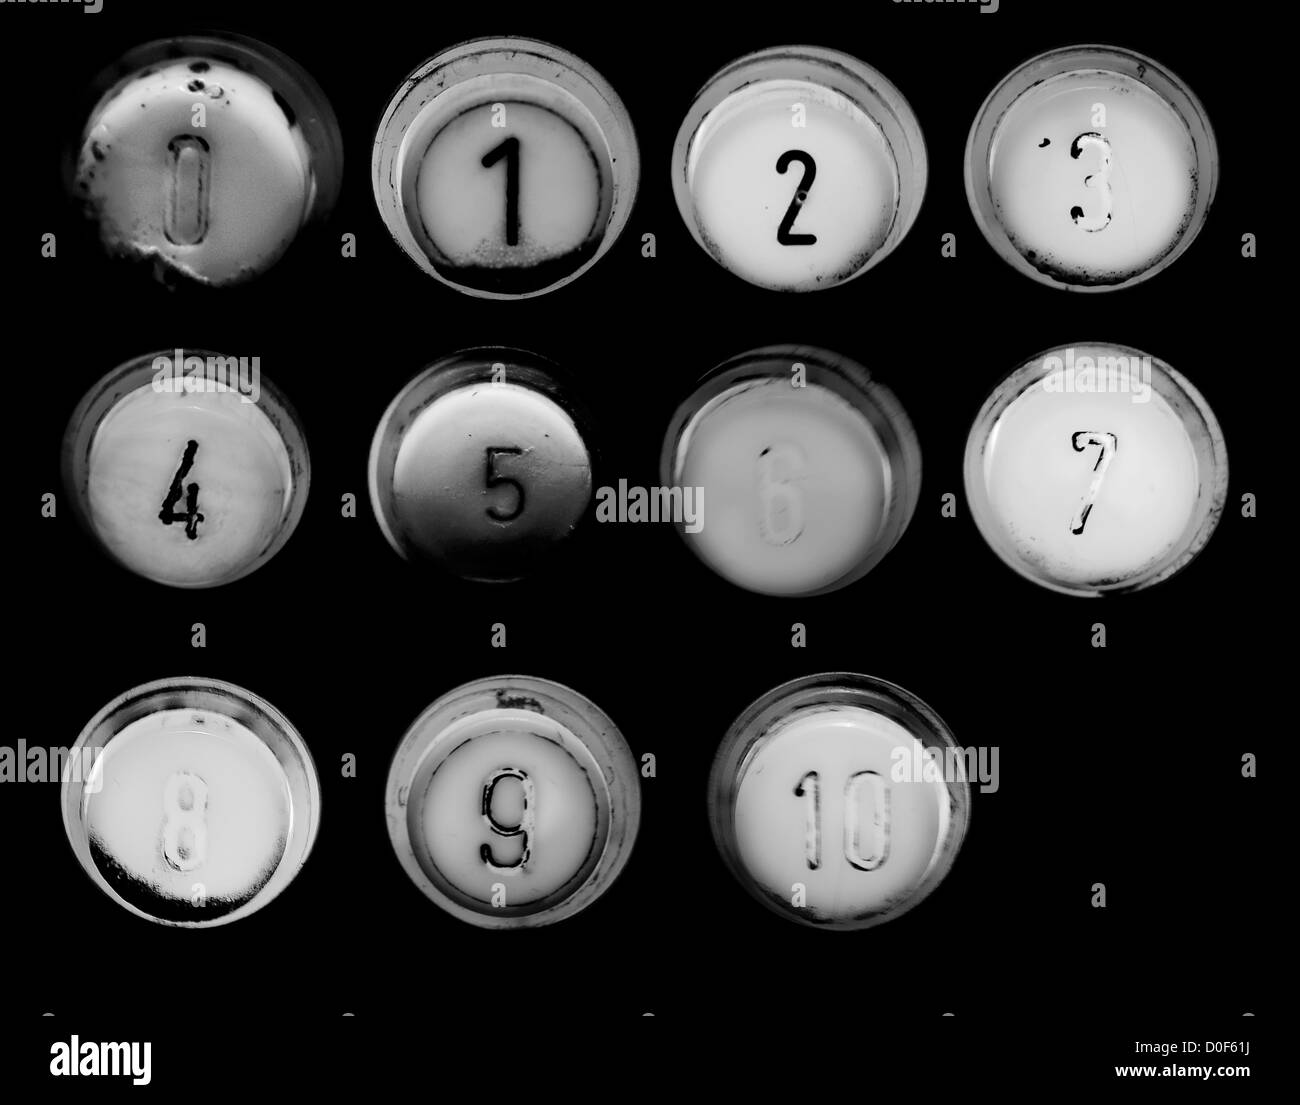 Elevator button panel Black and White Stock Photos & Images - Alamy